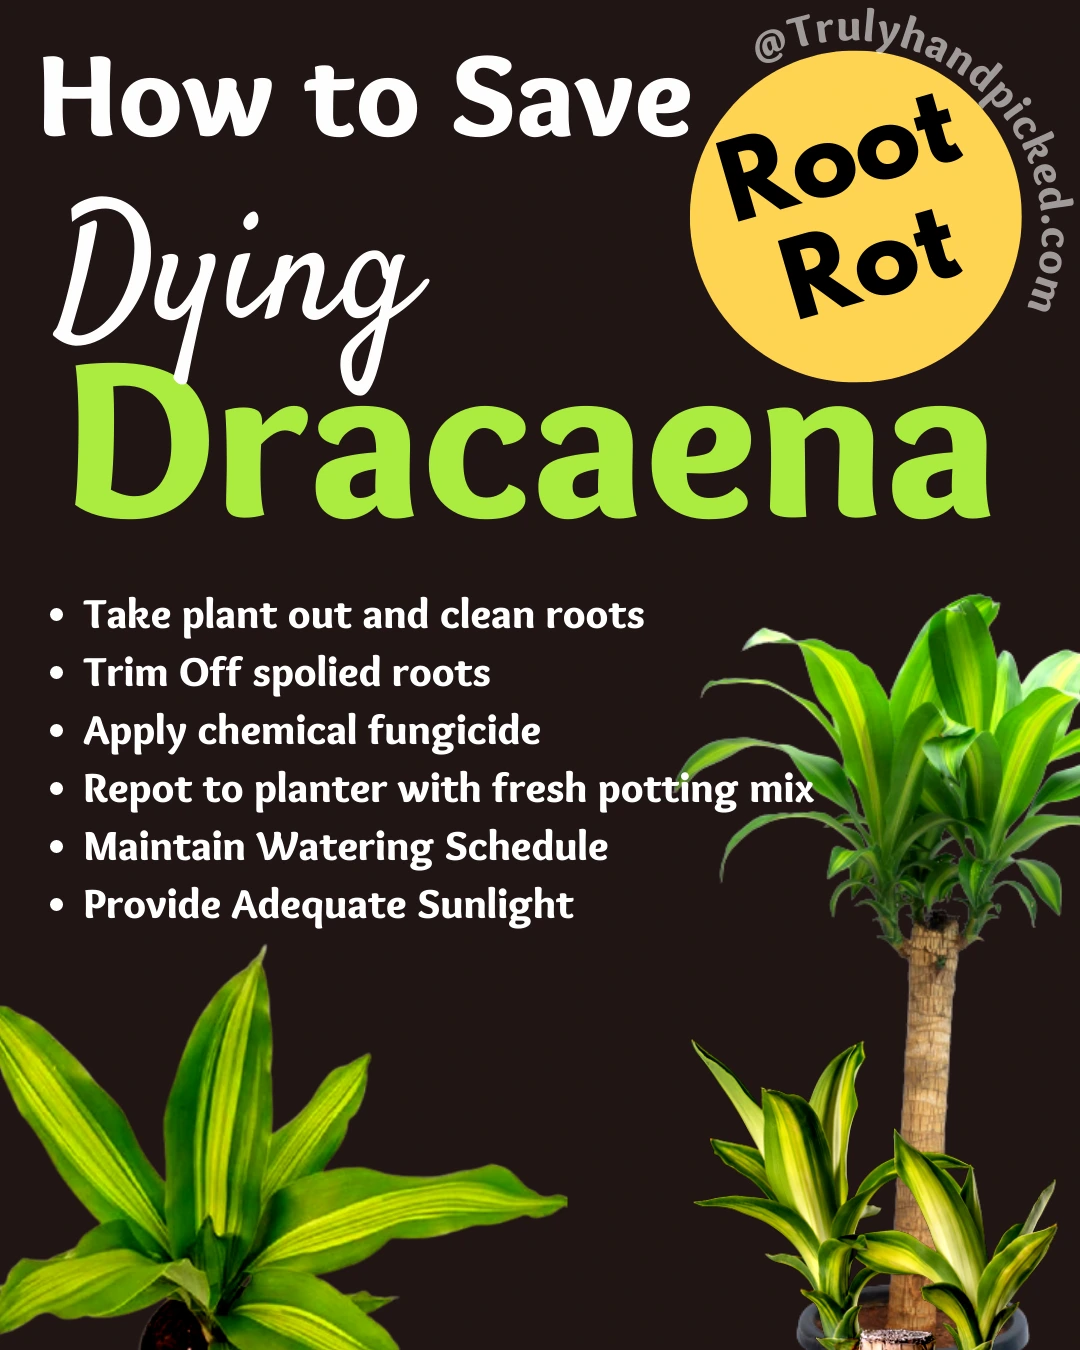 Quick tips to prevent root rot and save a dracaena from root rot